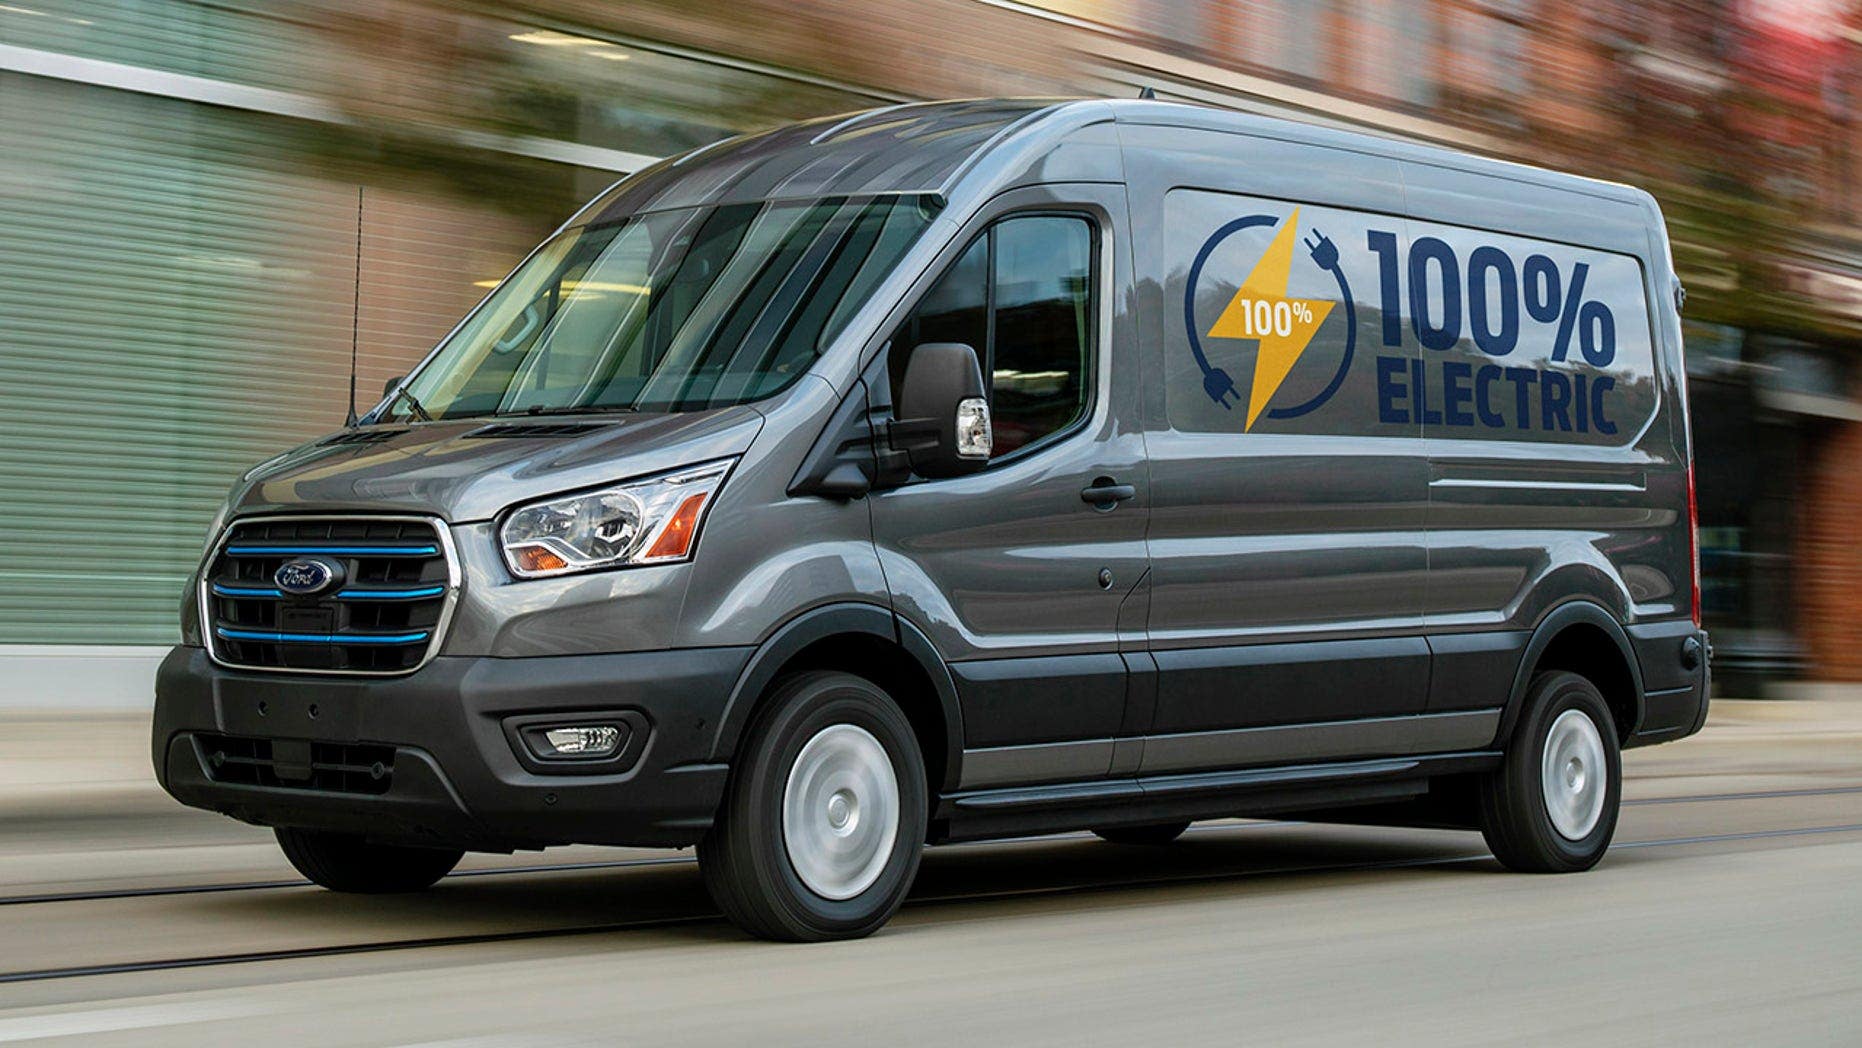 Here's how much the Ford E-Transit electric van costs